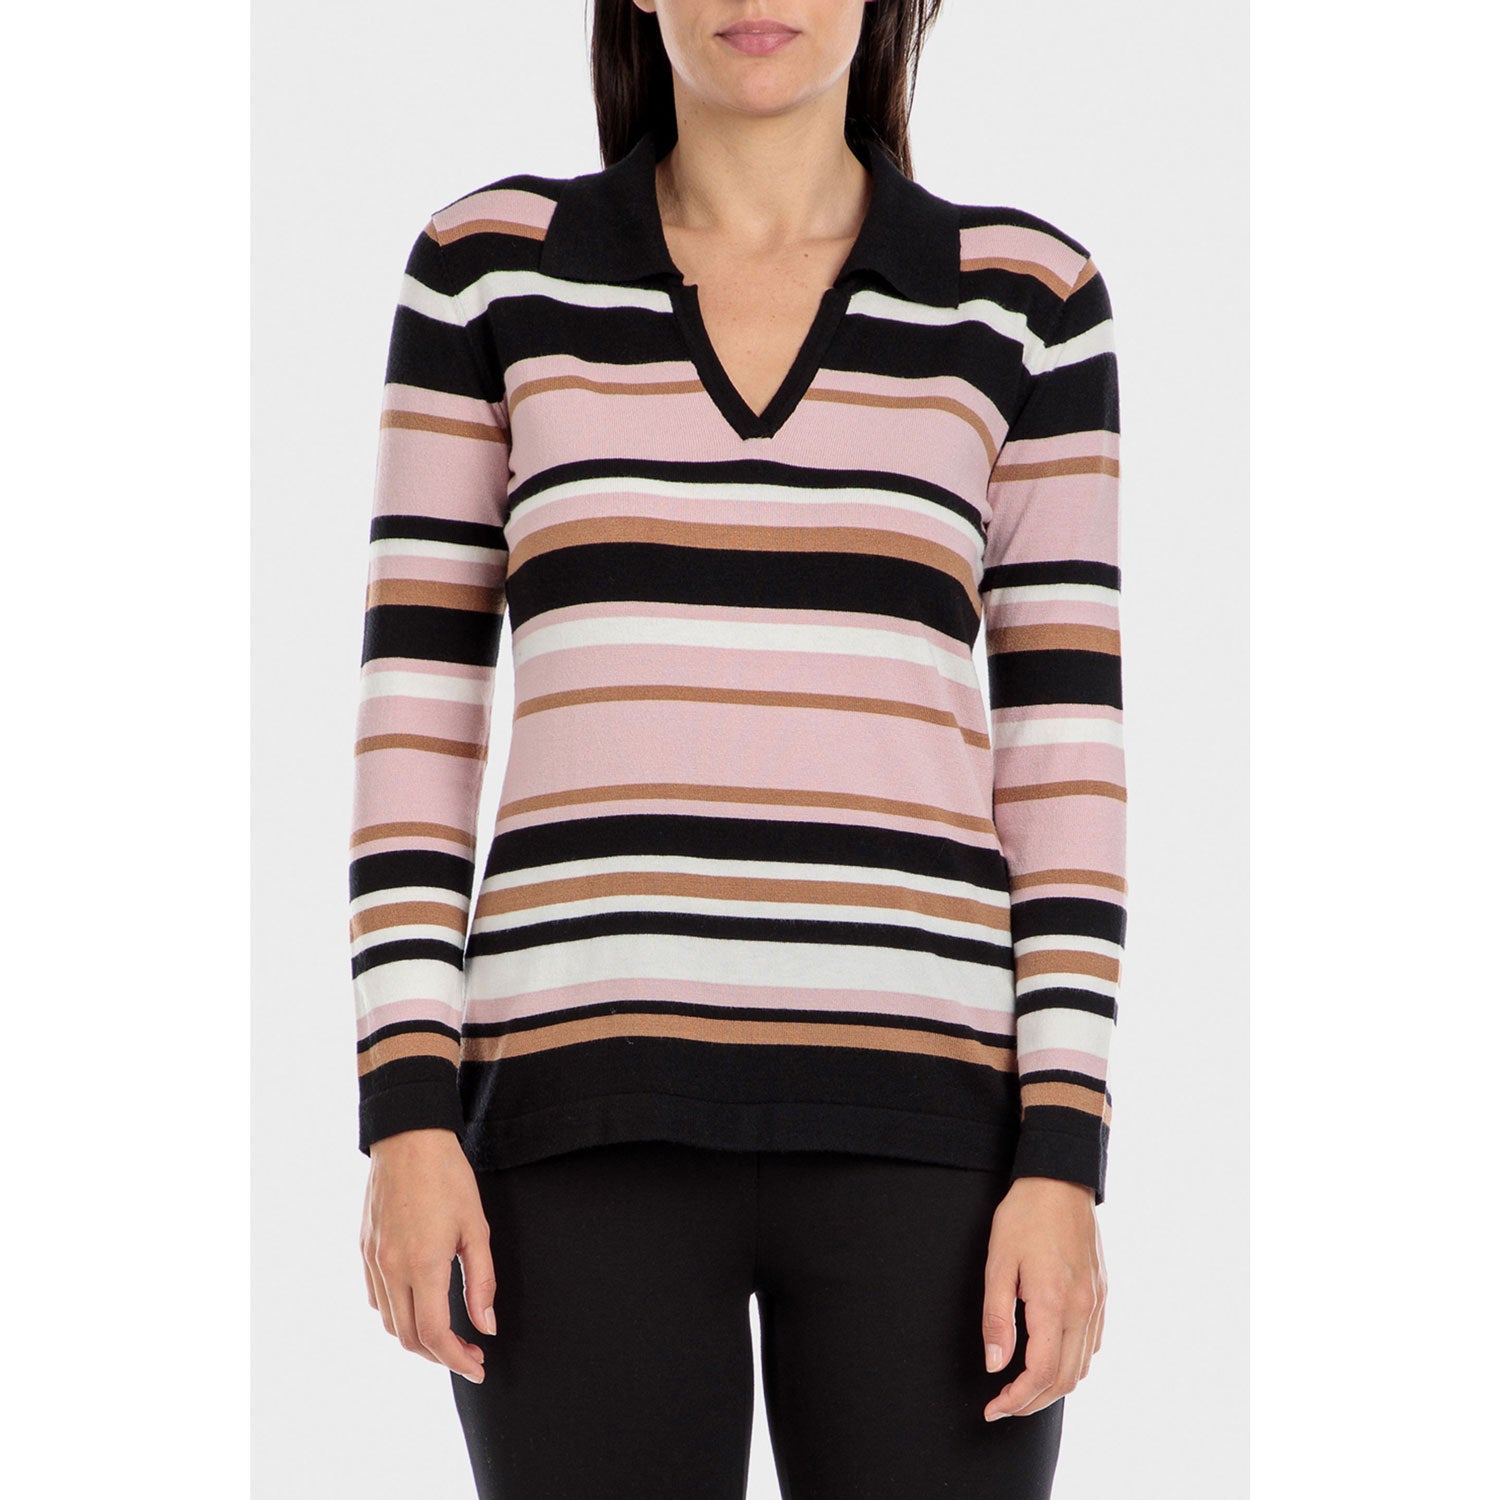 Punt Roma Multi-Coloured Striped Sweater - Black 1 Shaws Department Stores